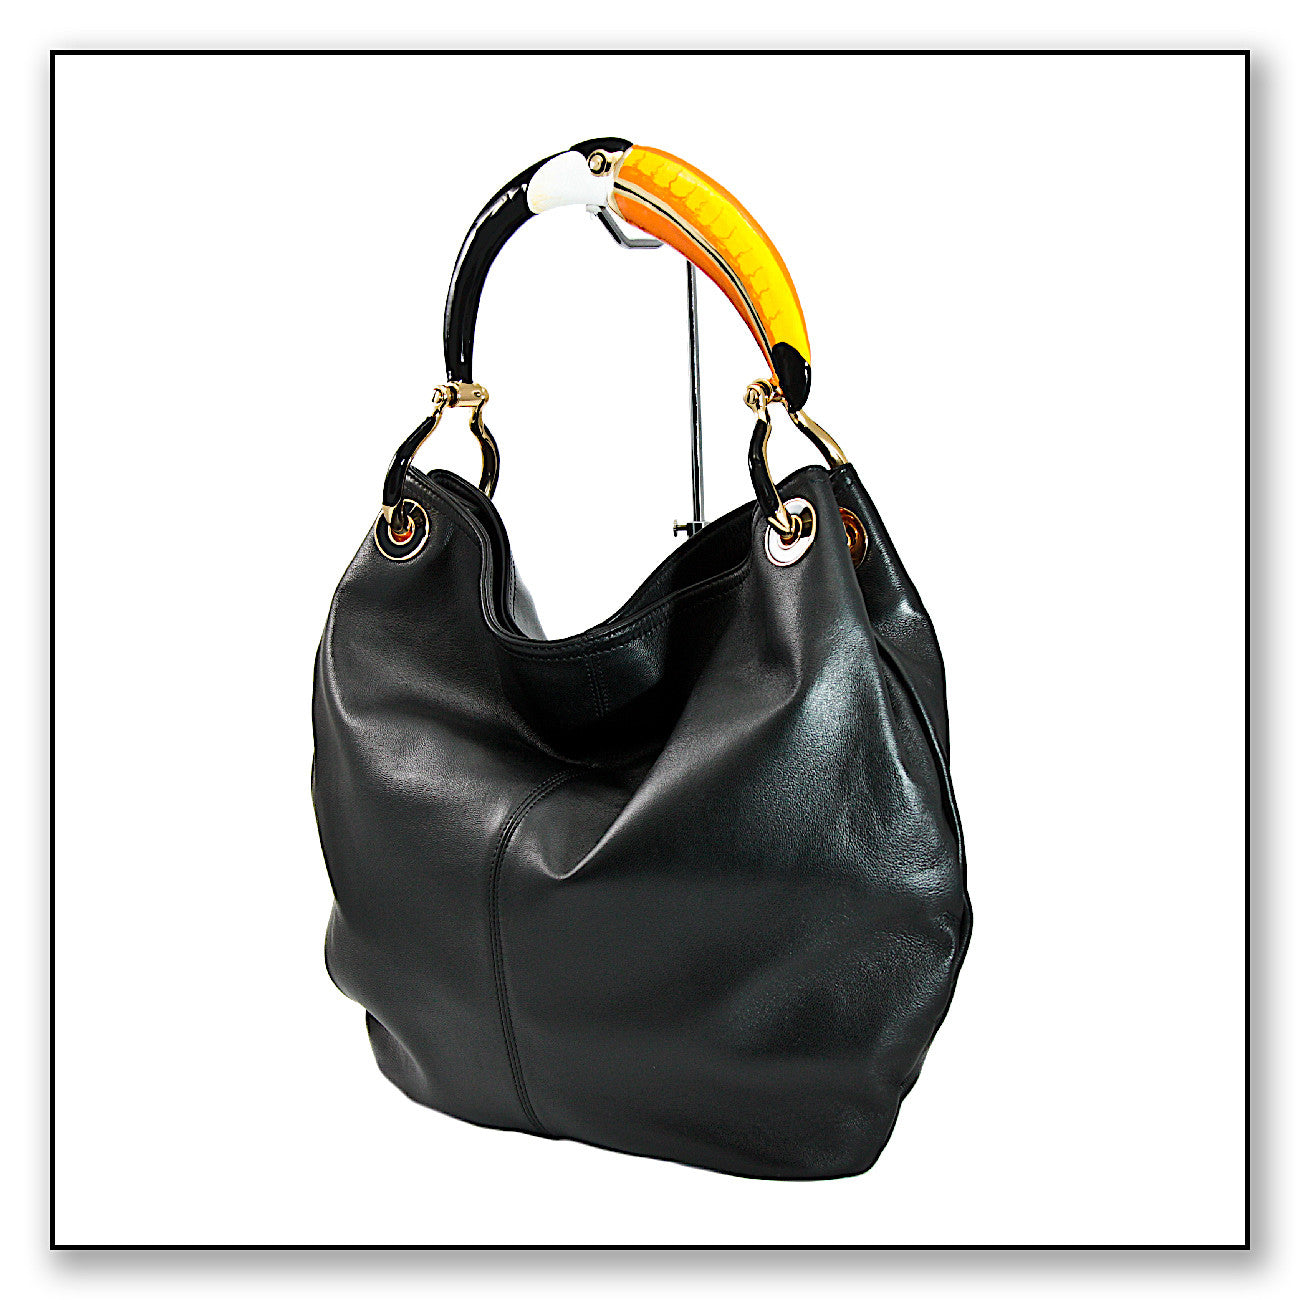 TOUCAN CLASSIC BAG WITH BLACK VEGAN LEATHER